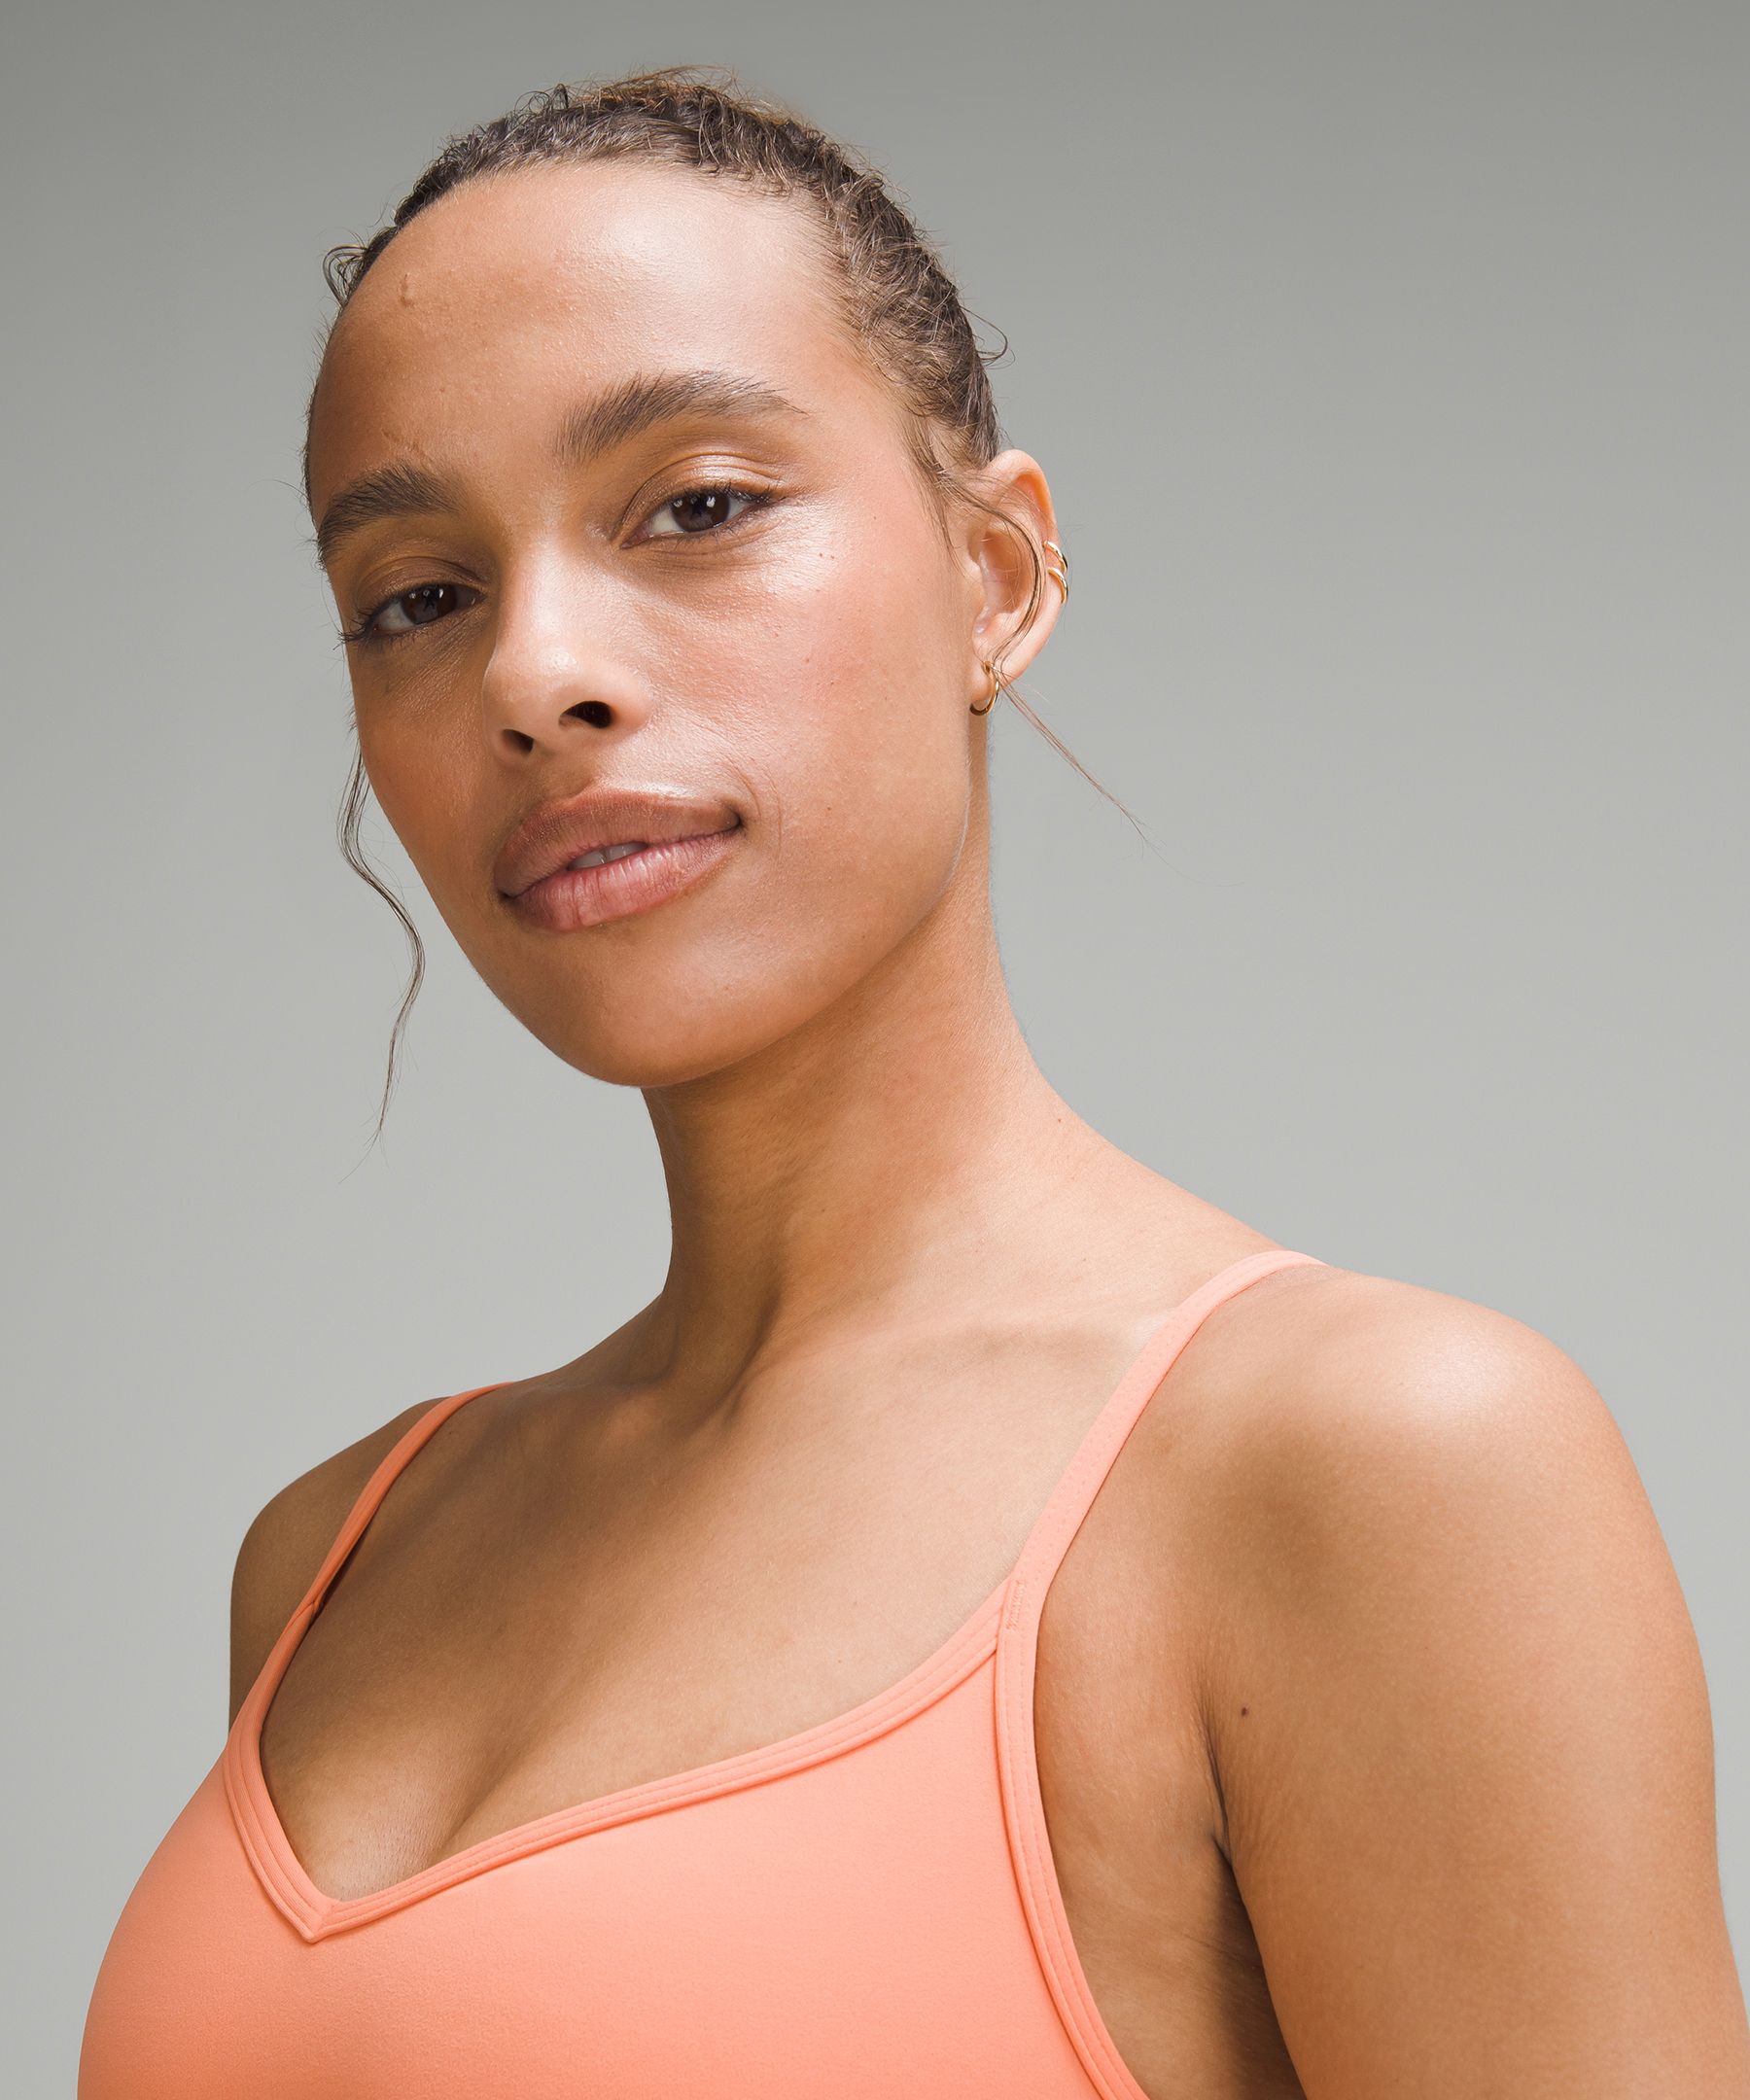 Lululemon Align Bra A/B Cup 10 Pink Size M - $35 (39% Off Retail) - From  Ashley